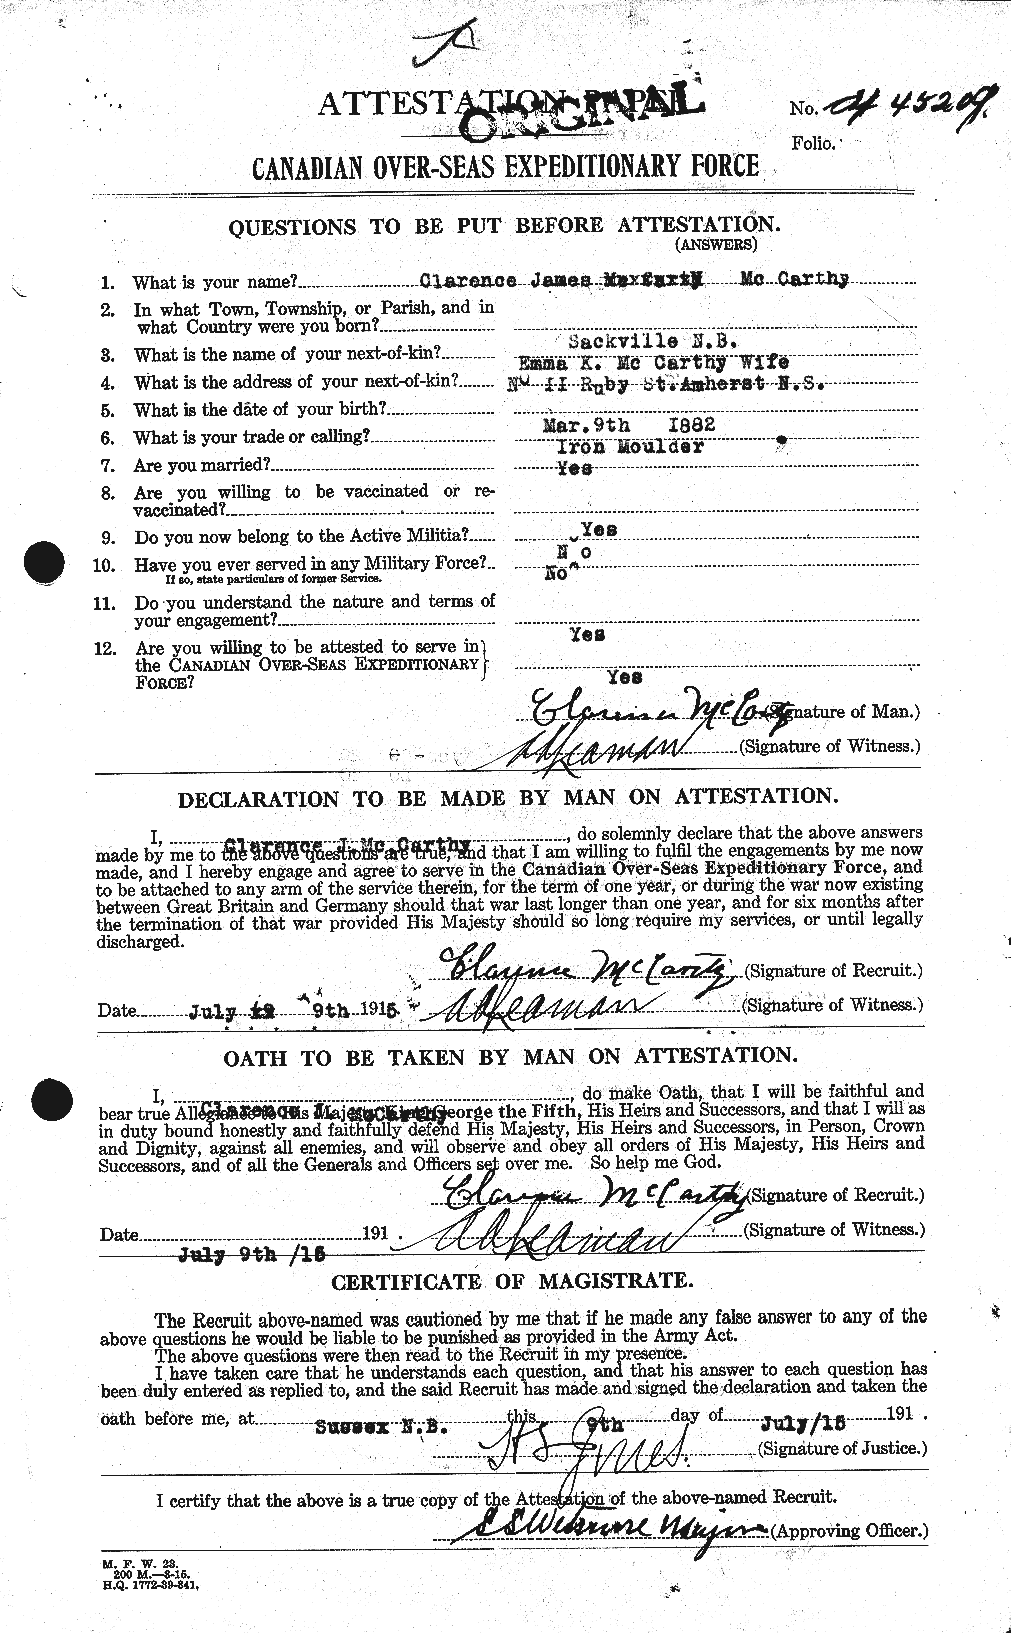 Personnel Records of the First World War - CEF 132302a